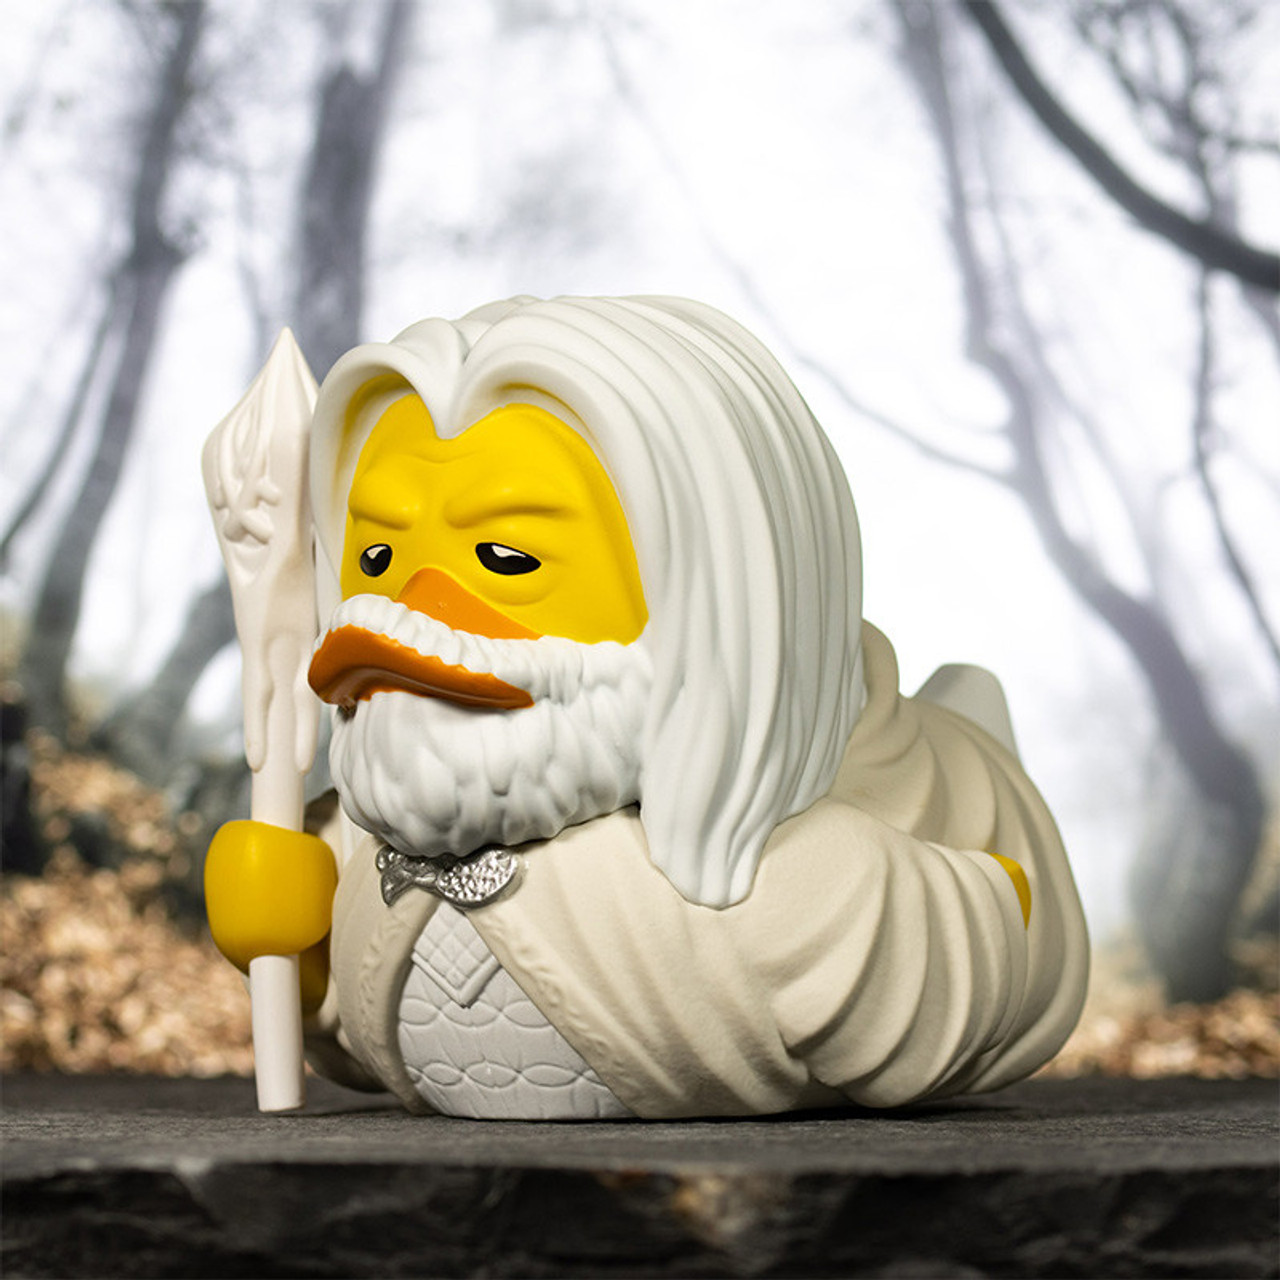 Numskull TUBBZ Lord of The Rings - Sauron Collectible Duck Figure Toy Buy  on